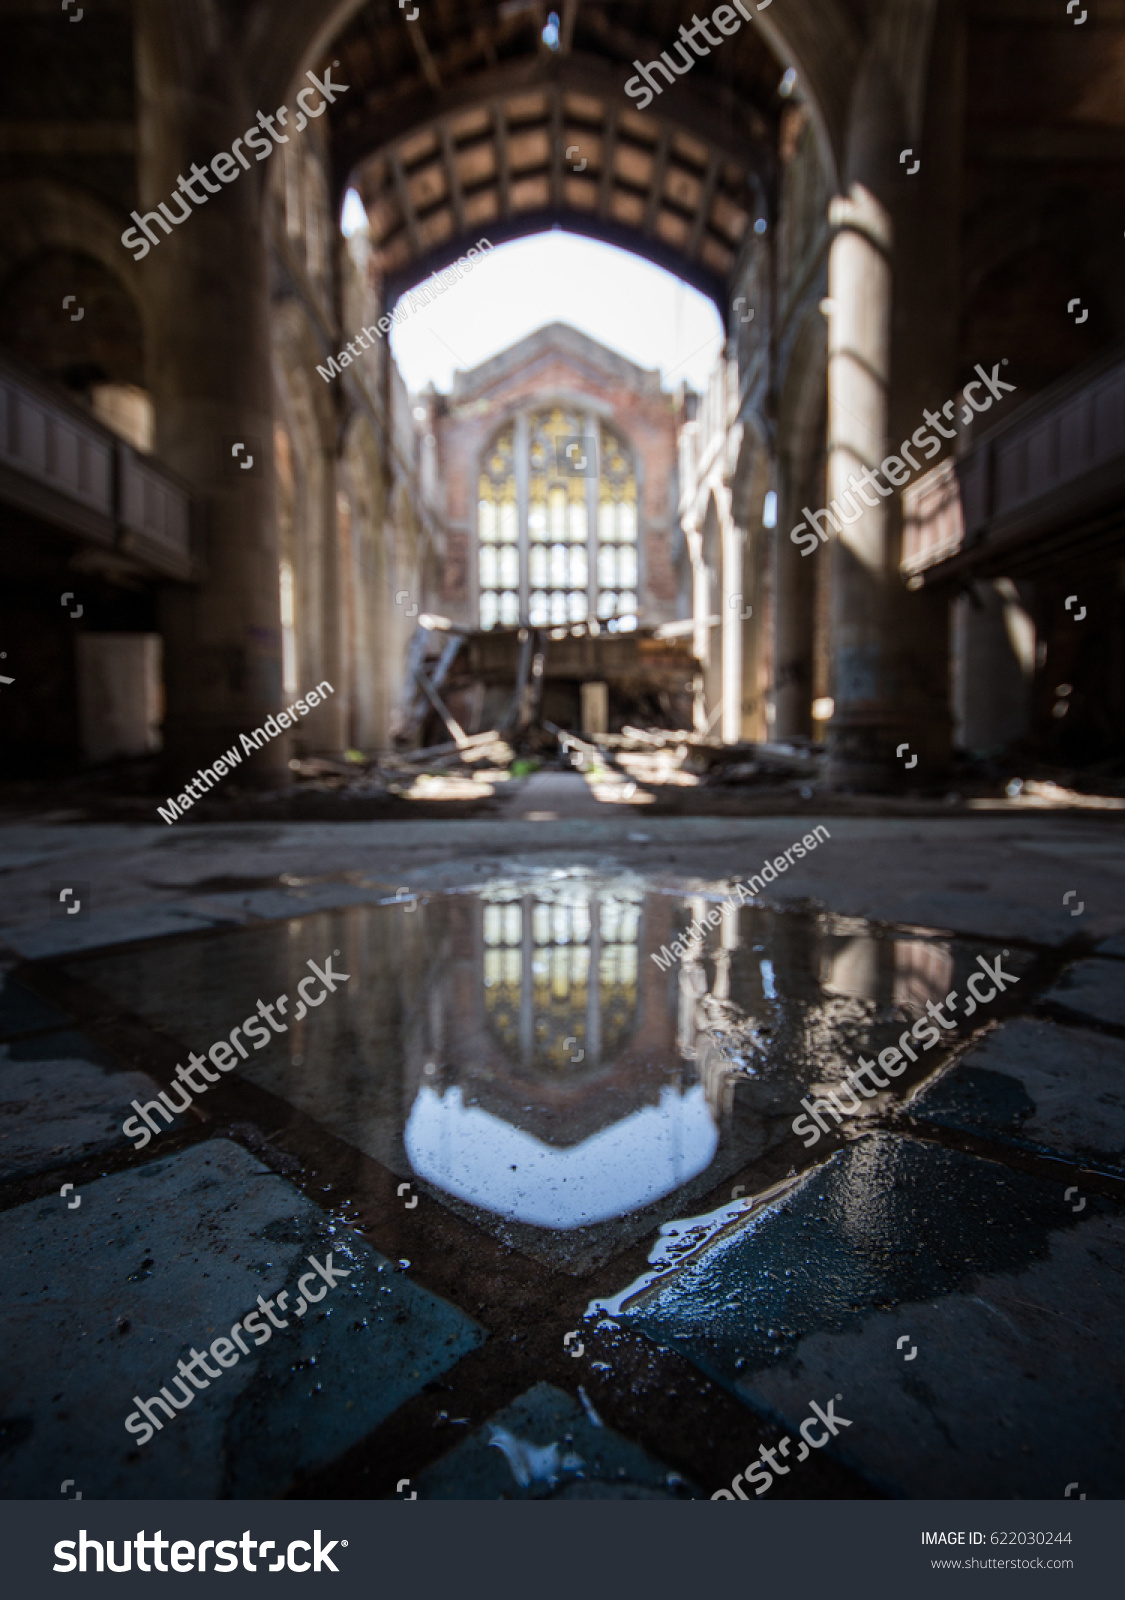 stock-photo-shallow-depth-of-field-of-church-with-puddle-in-focus-on-ground-in-abandoned-building-622030244.jpg